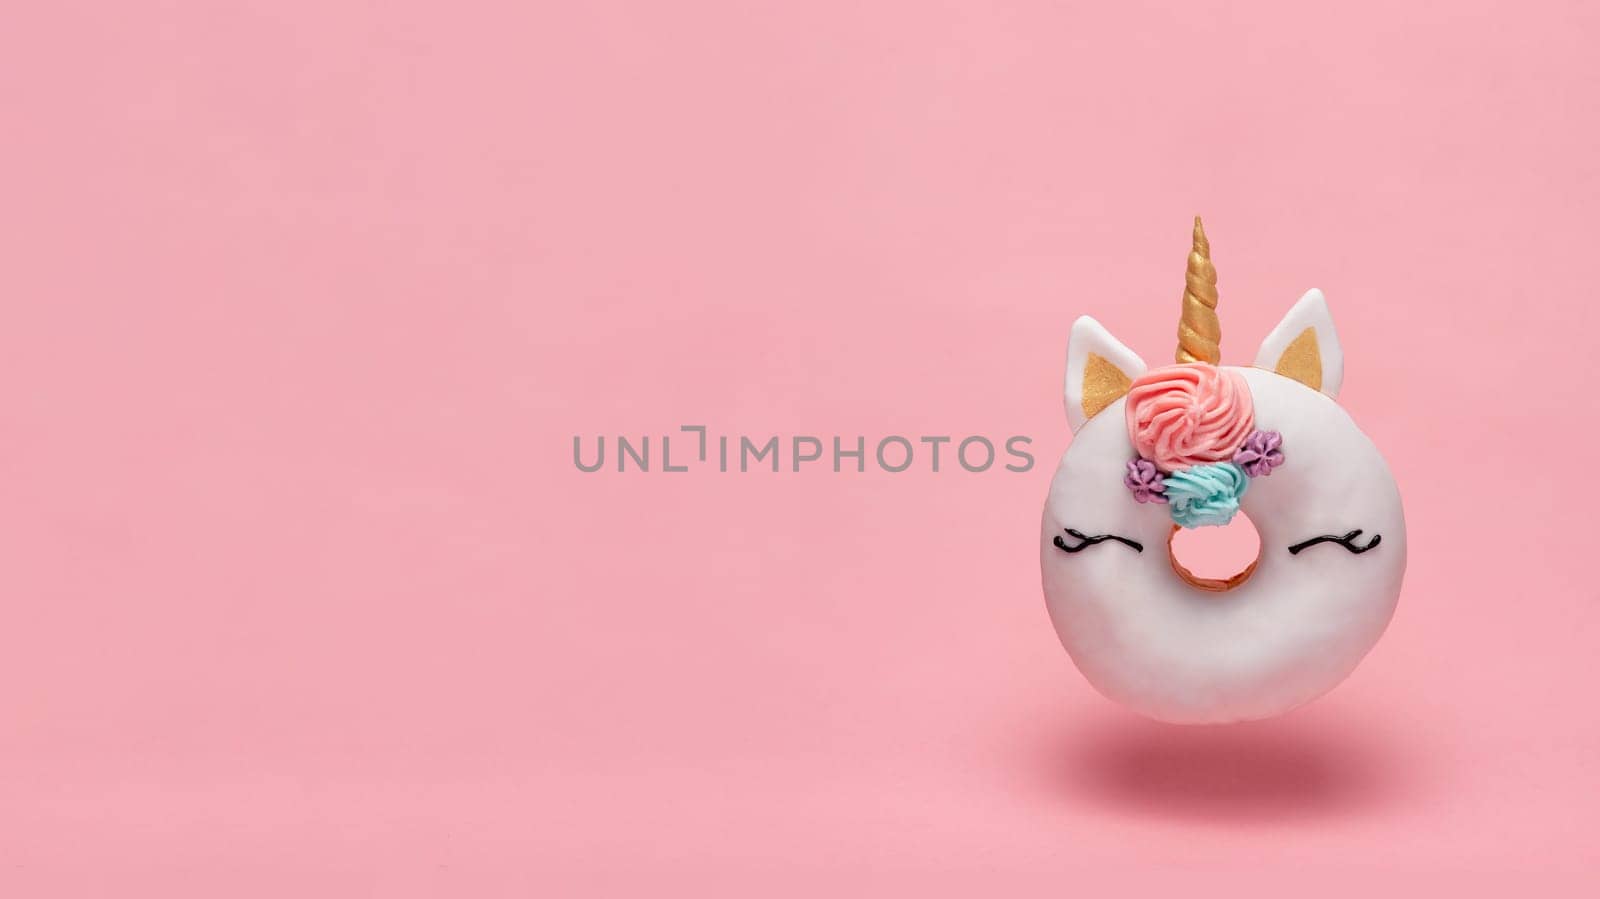 Unicorn donut flying, pink background, copy space by fascinadora